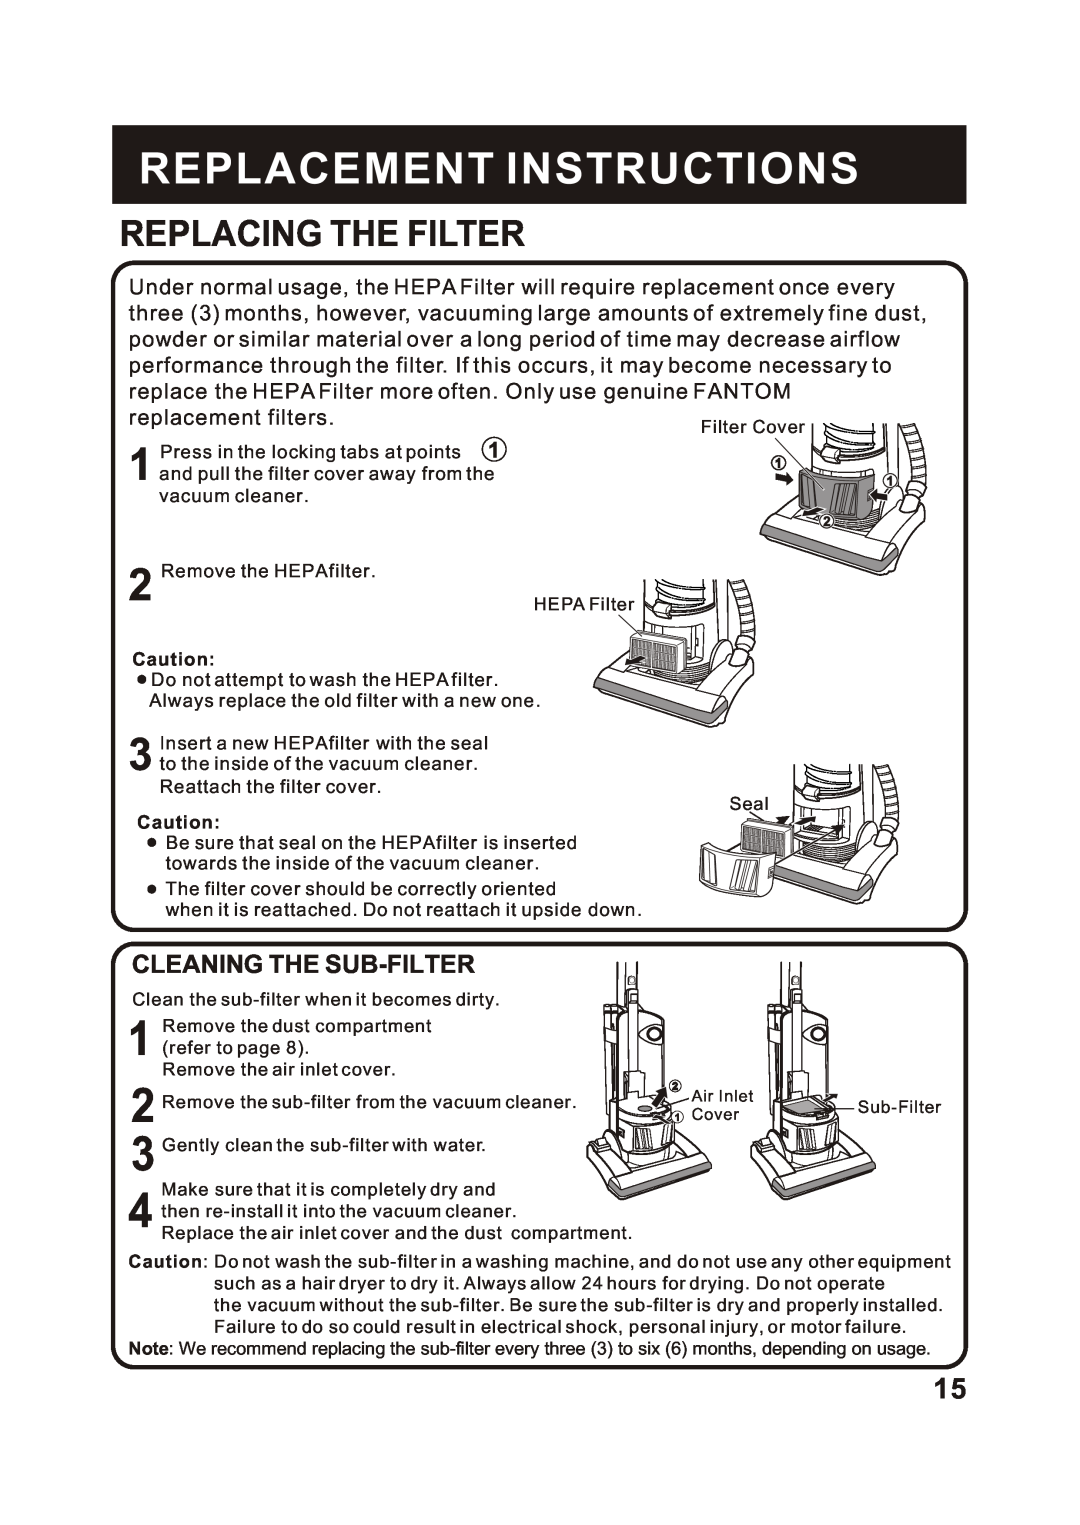 Fantom Vacuum FM742H instruction manual Replacing The Filter, Cleaning The Sub-Filter, Replacement Instructions 